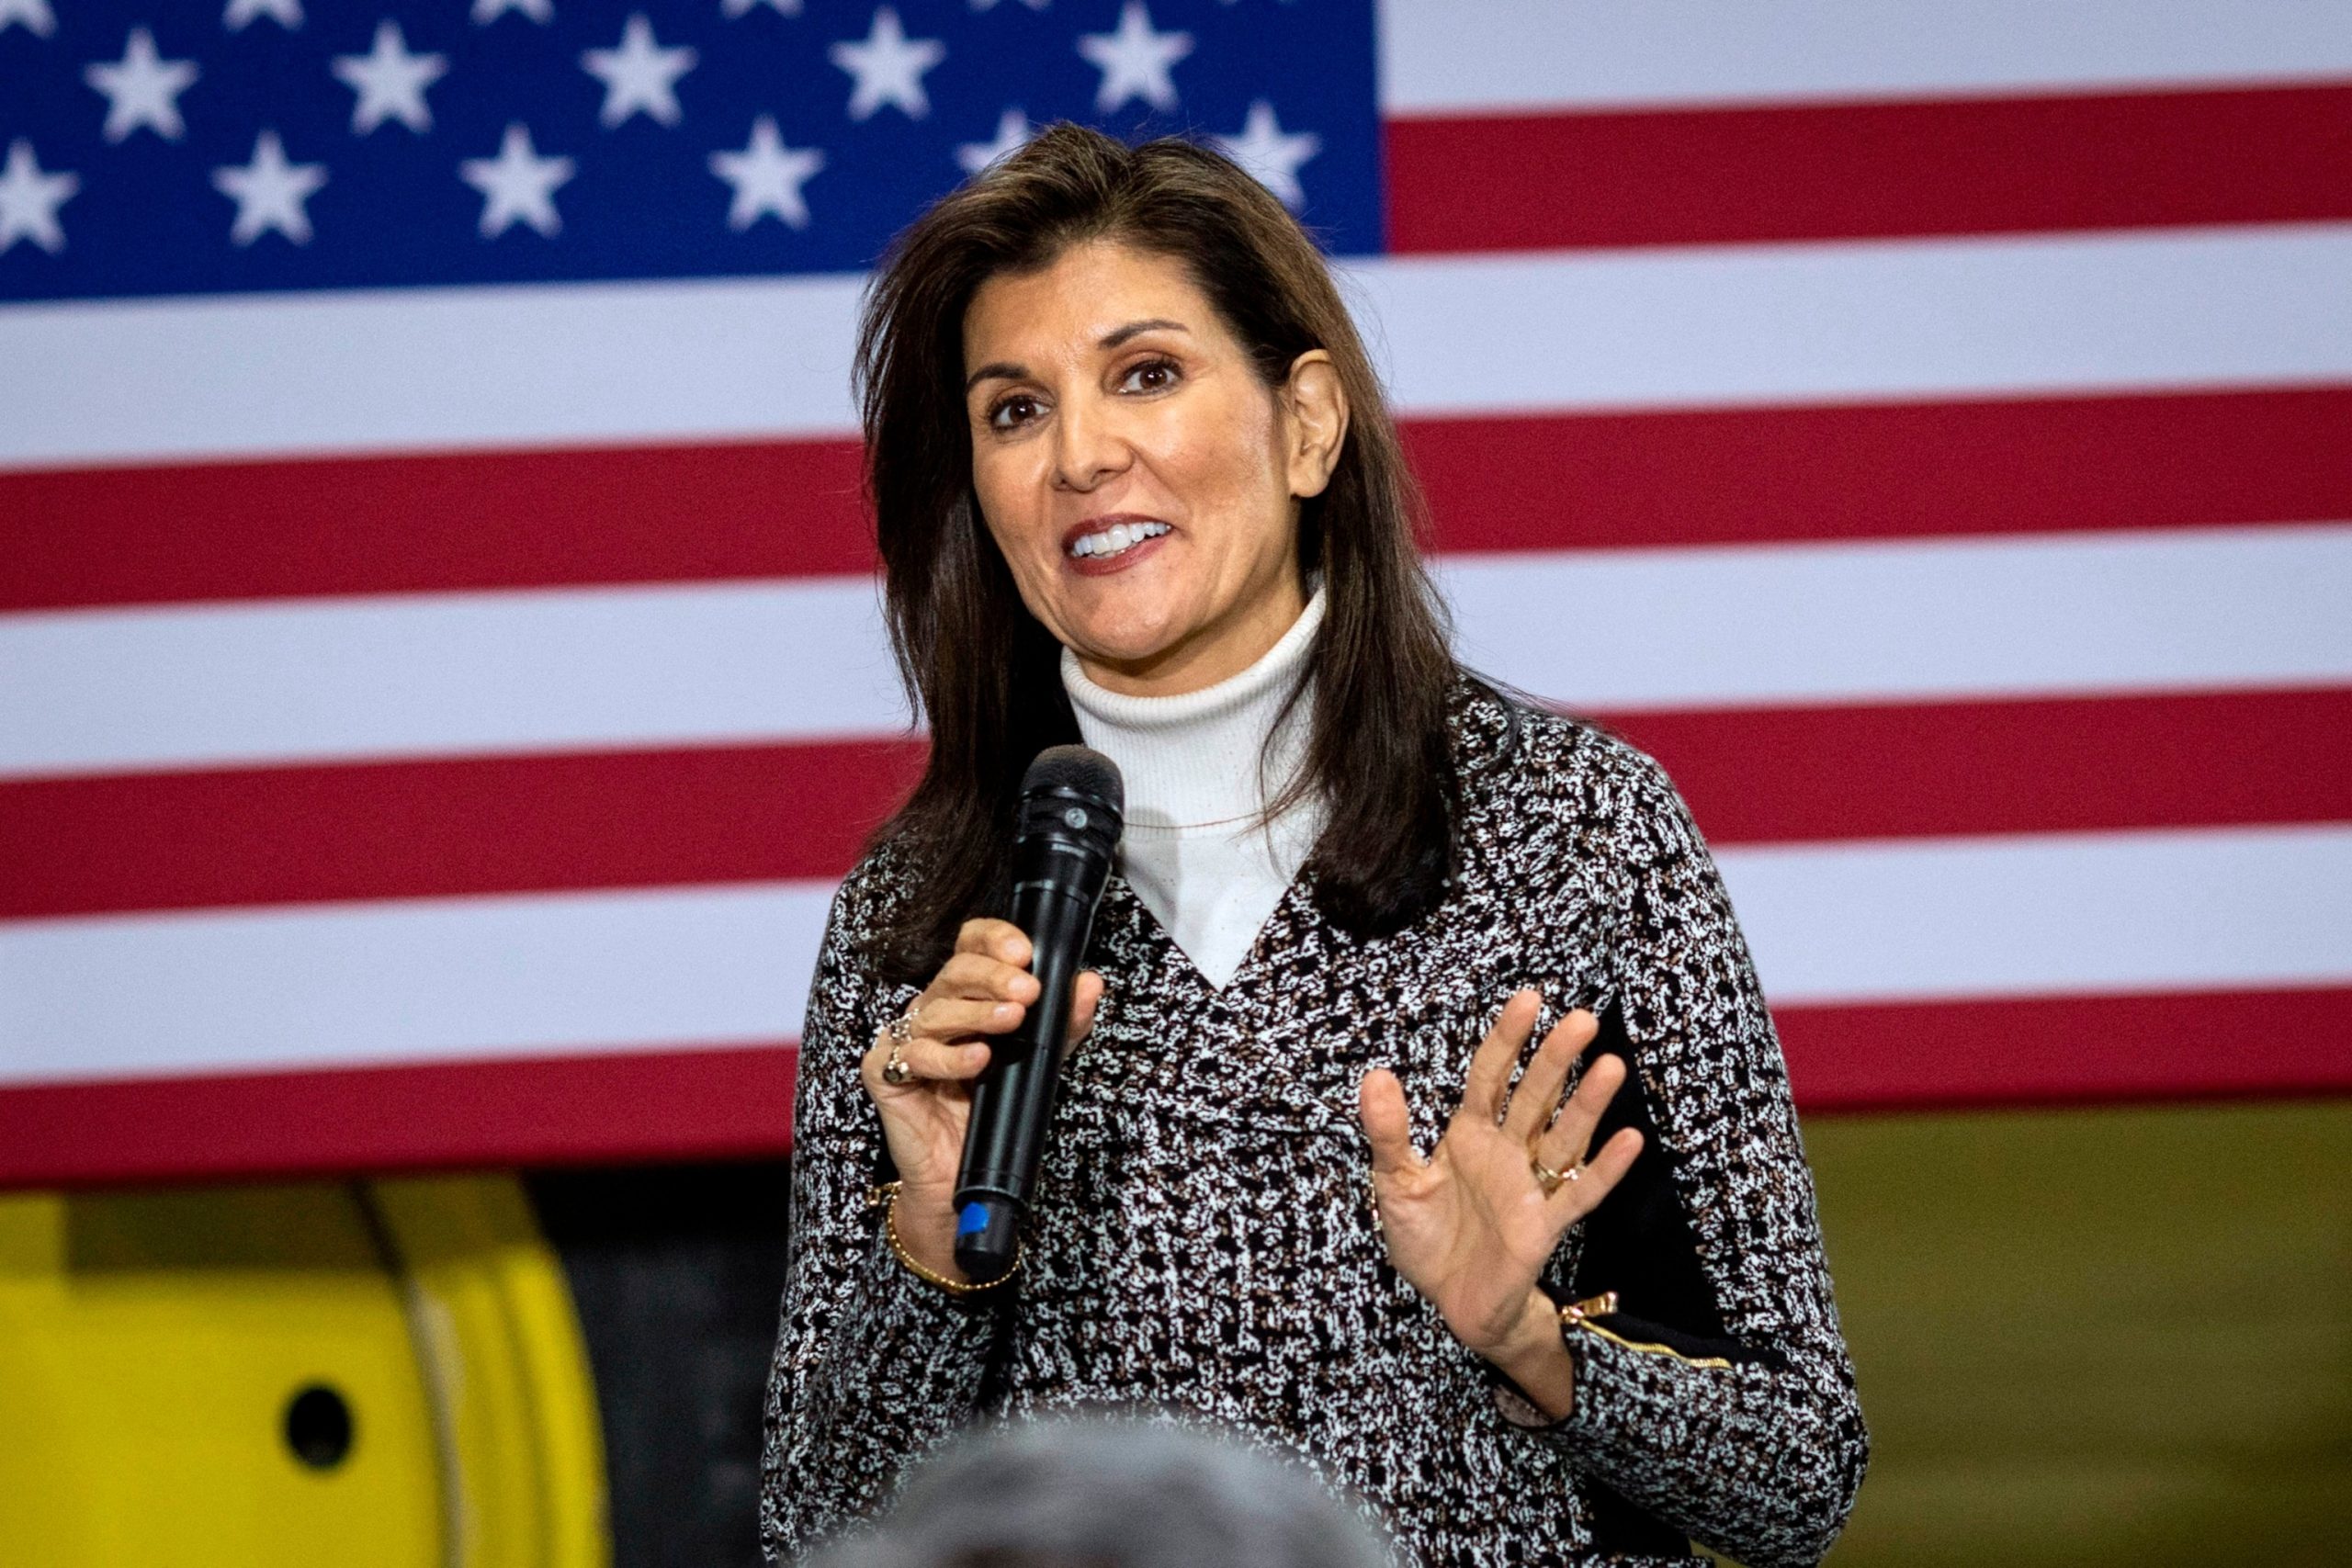 Nikki Haley provides further explanation on her Civil War comment following criticism